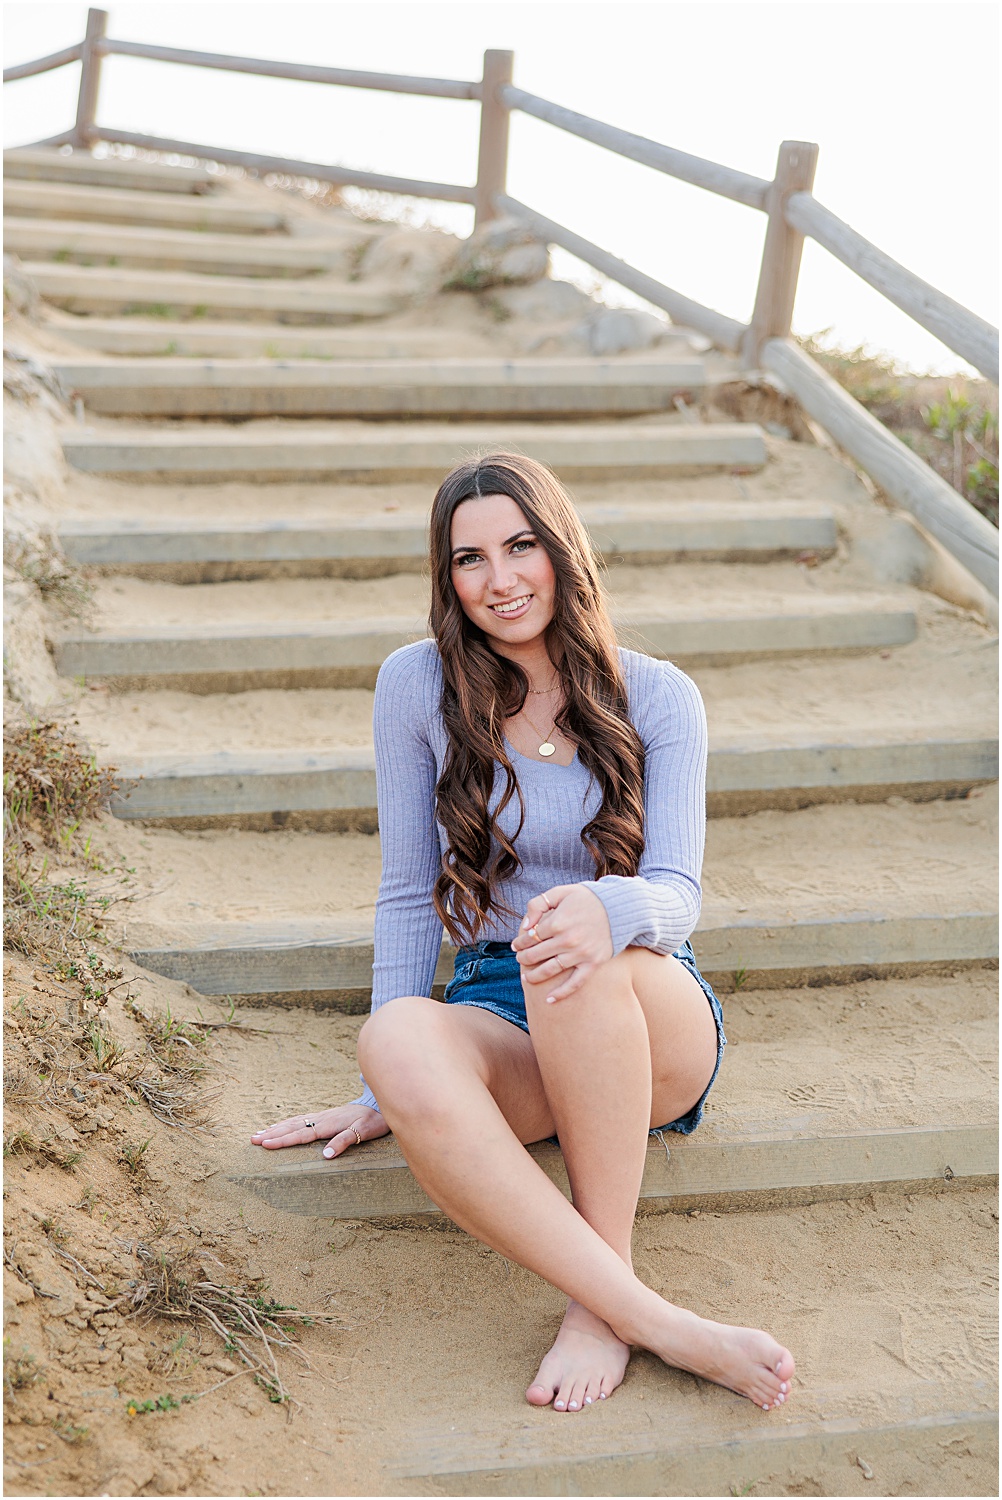 Torrey Pines State Beach Senior Photo Session | High School Senior Girl posing on wooden stairs at beach 